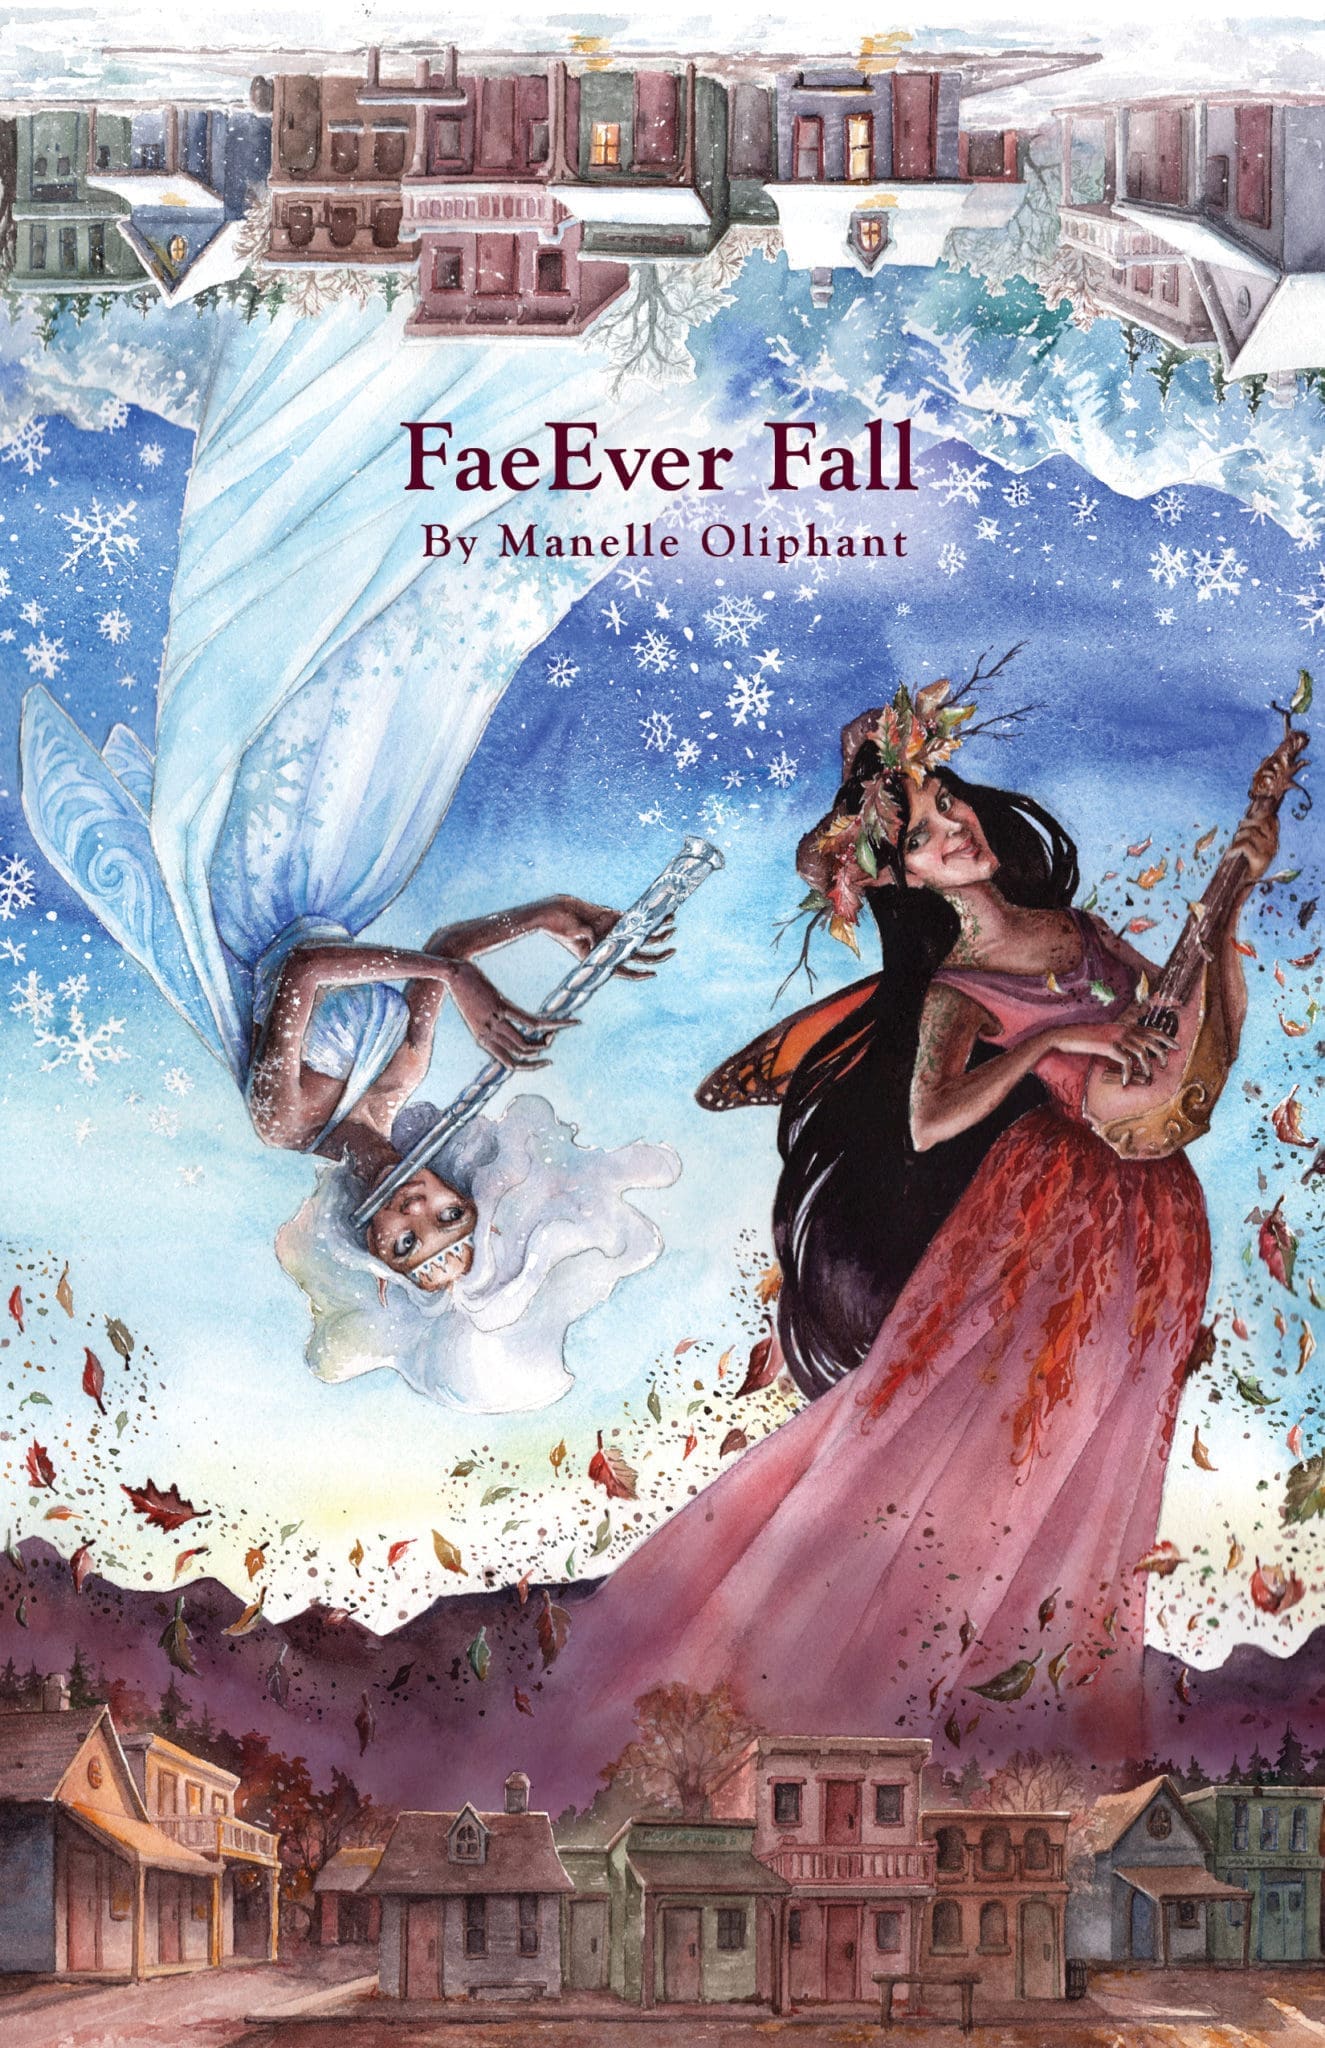 FaeEver Fall